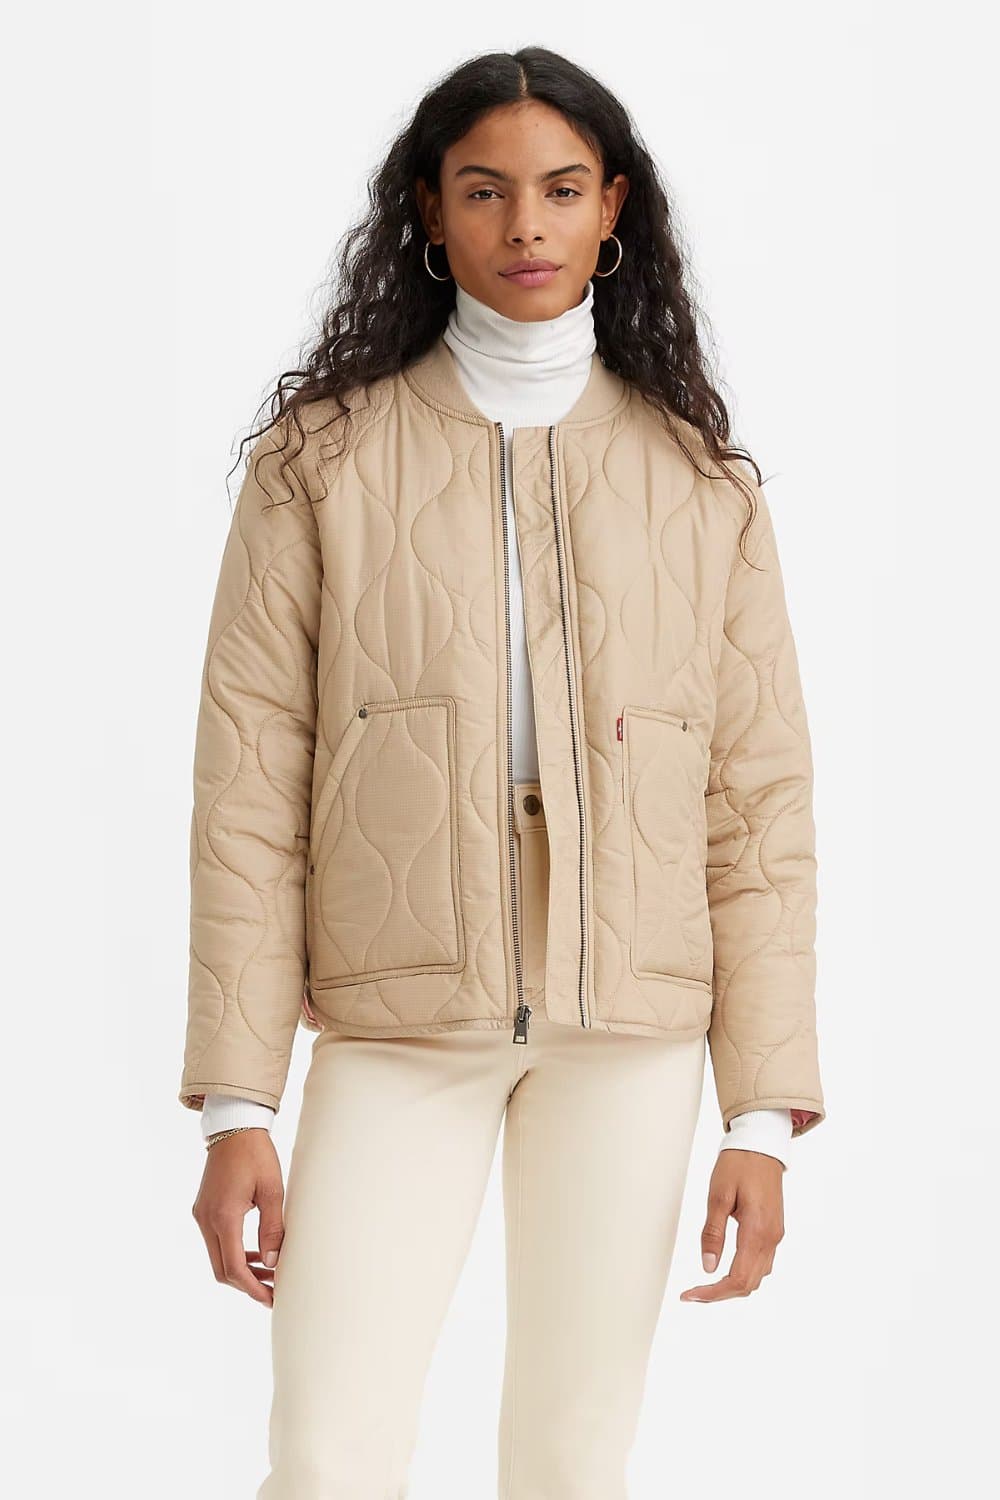 Levi's Onion Quilted Liner Jacket